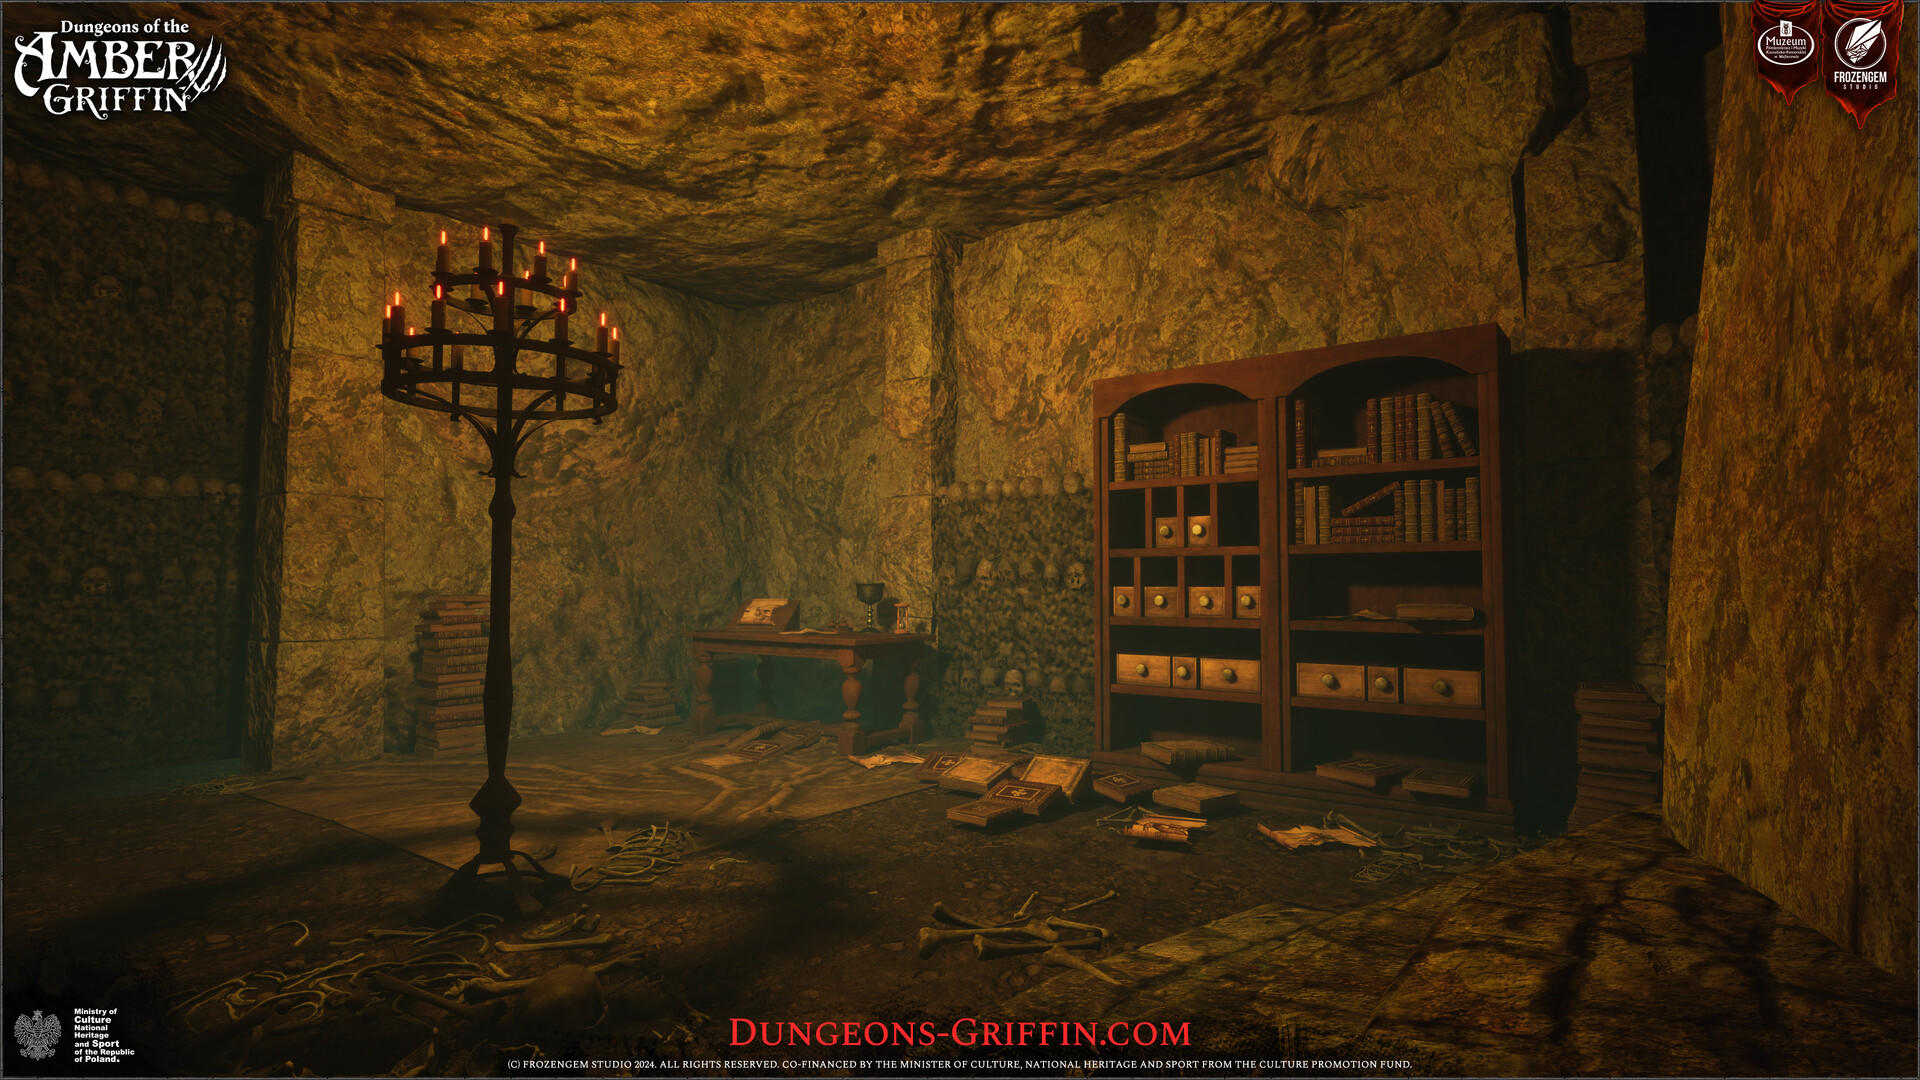 Dungeons of the Amber Griffin screenshot game